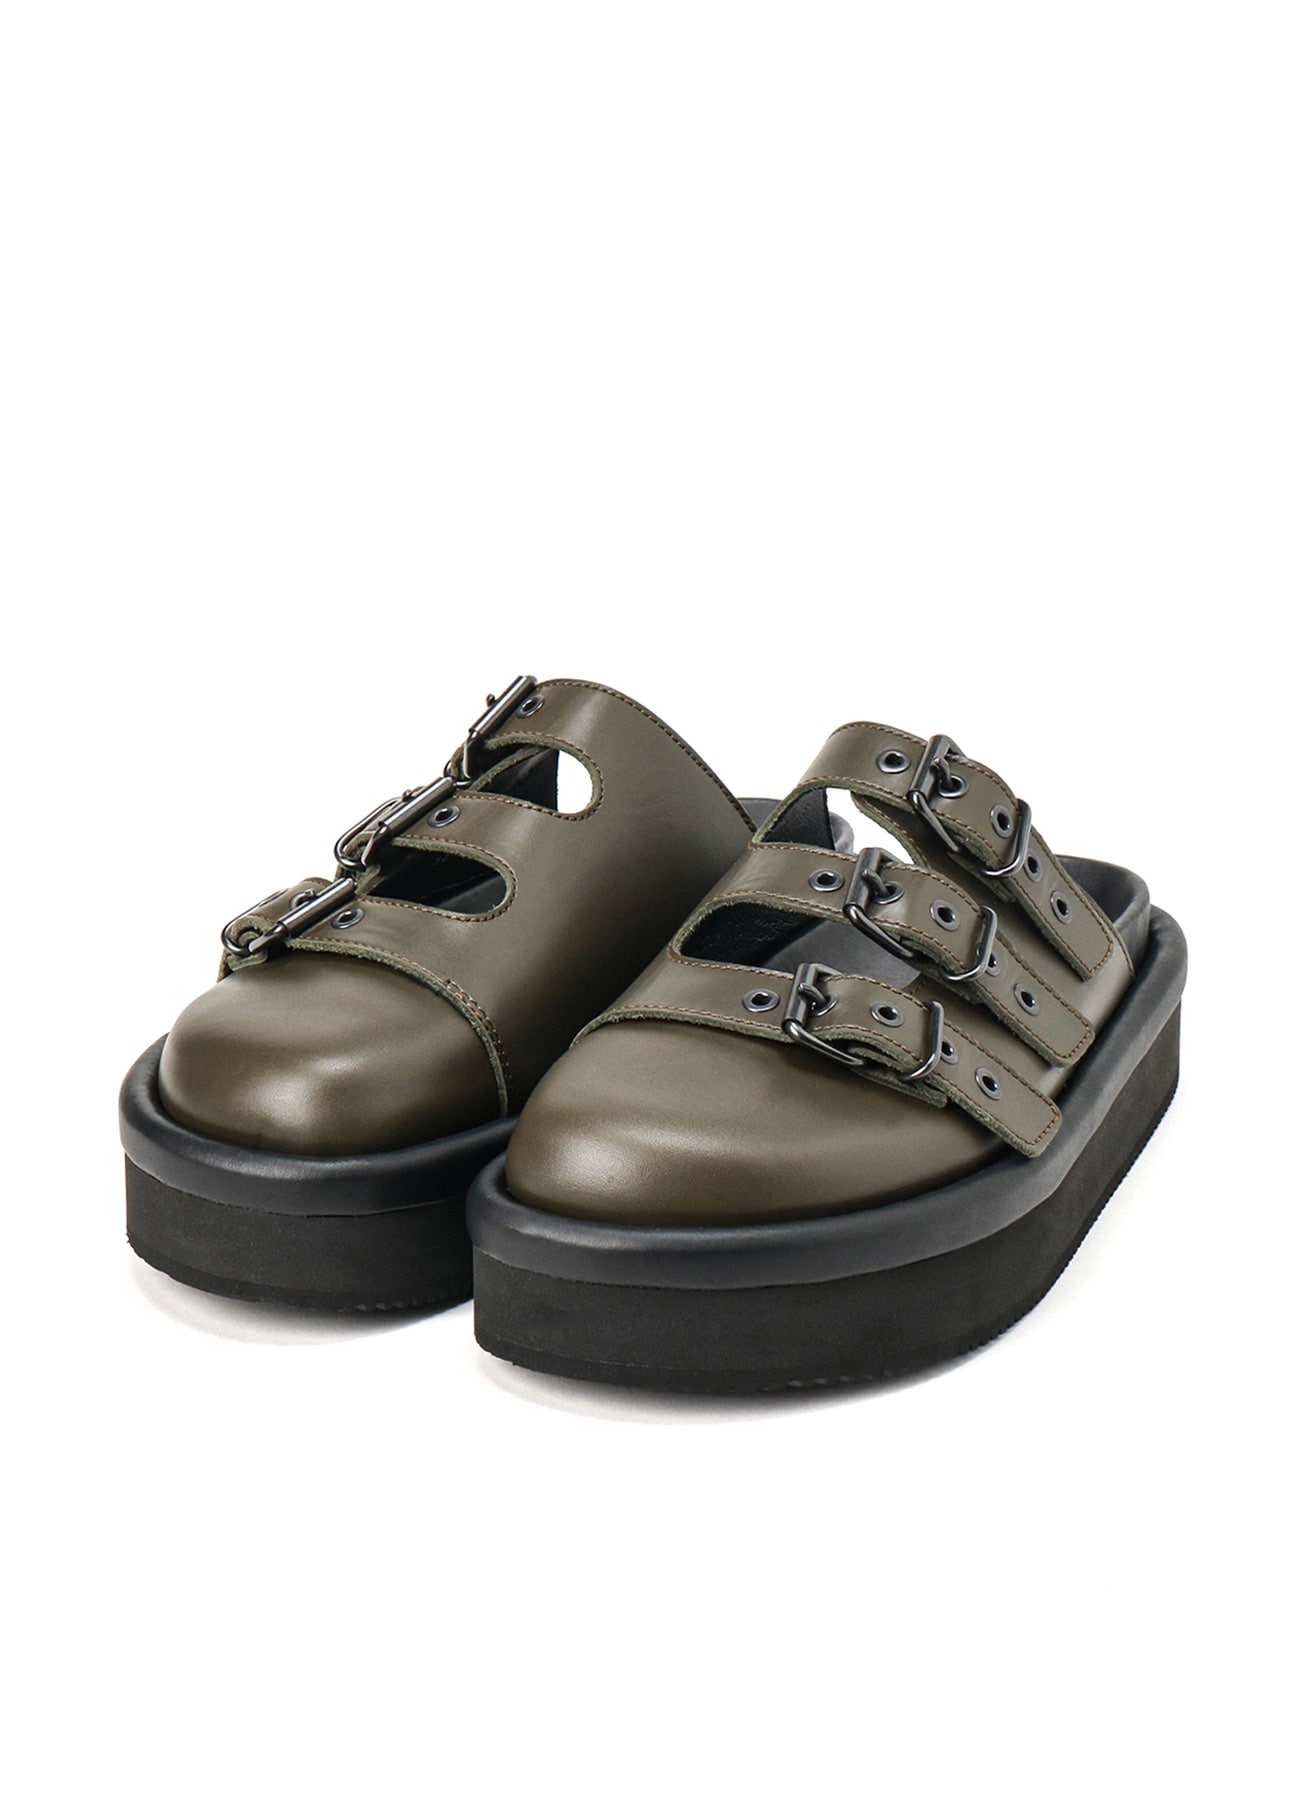 【7/17 12:00 Release】COW LEATHER SANDAL